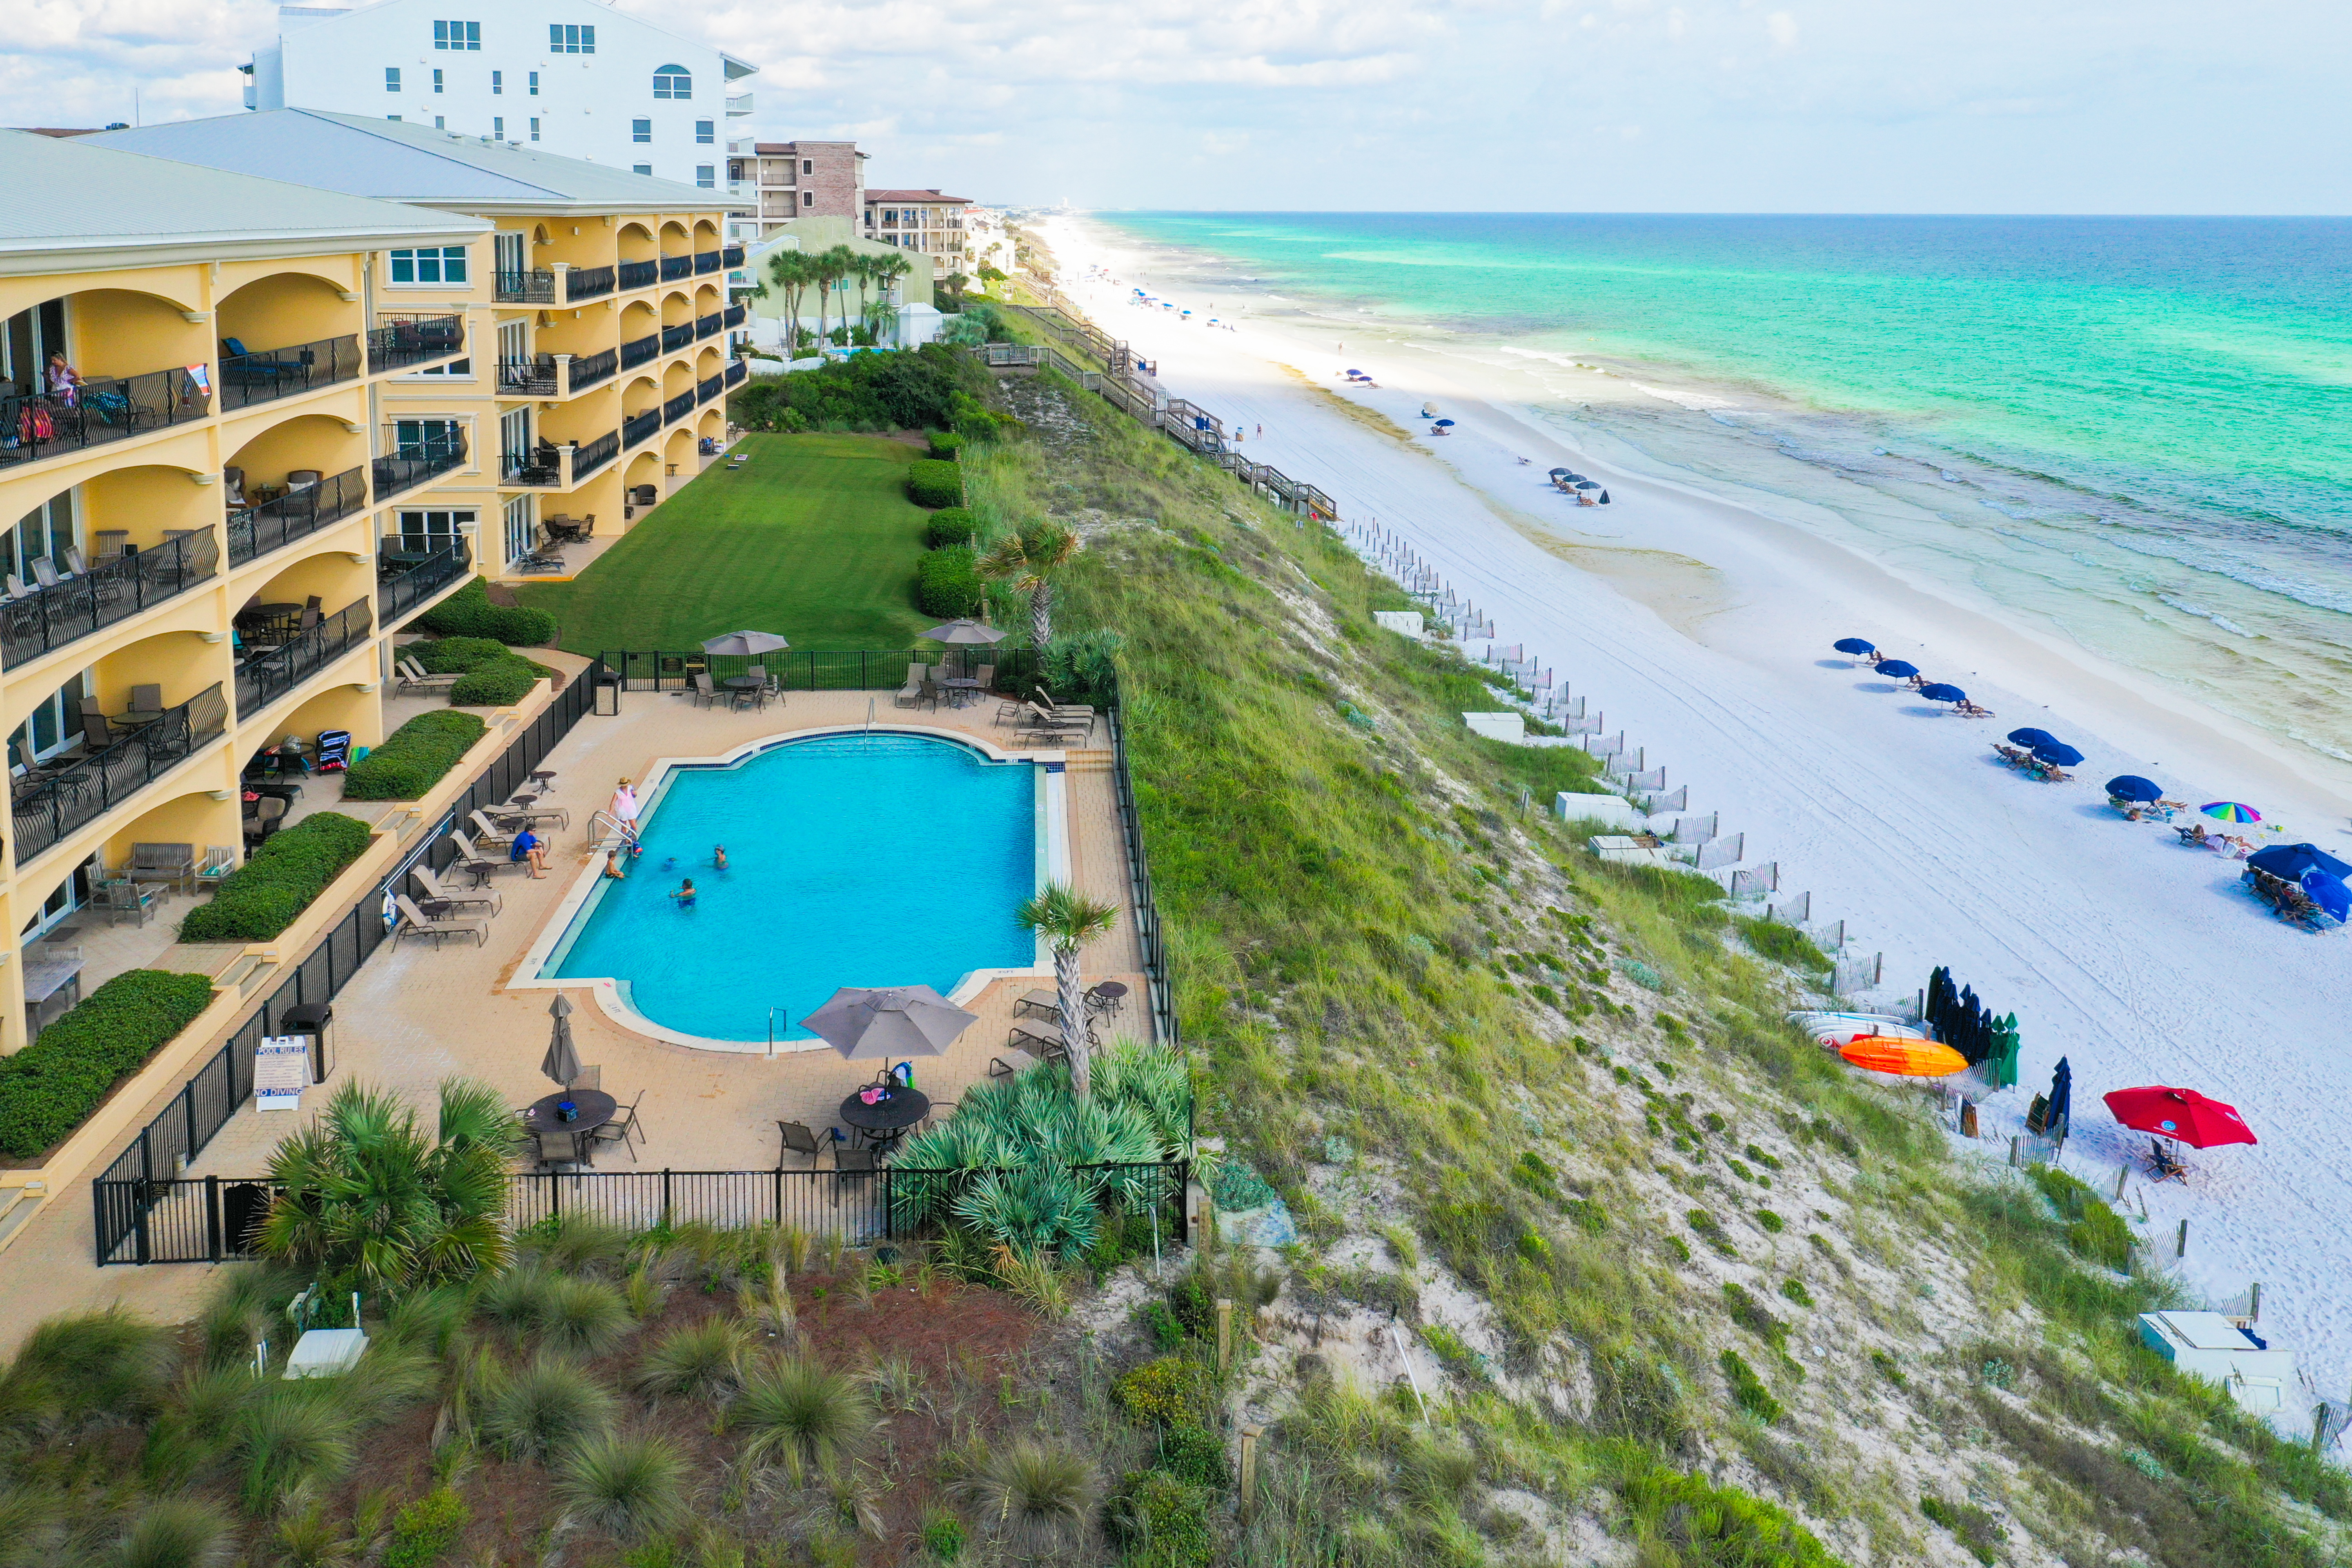 A view of the gulf front pool at a condominium on the beach along 30A